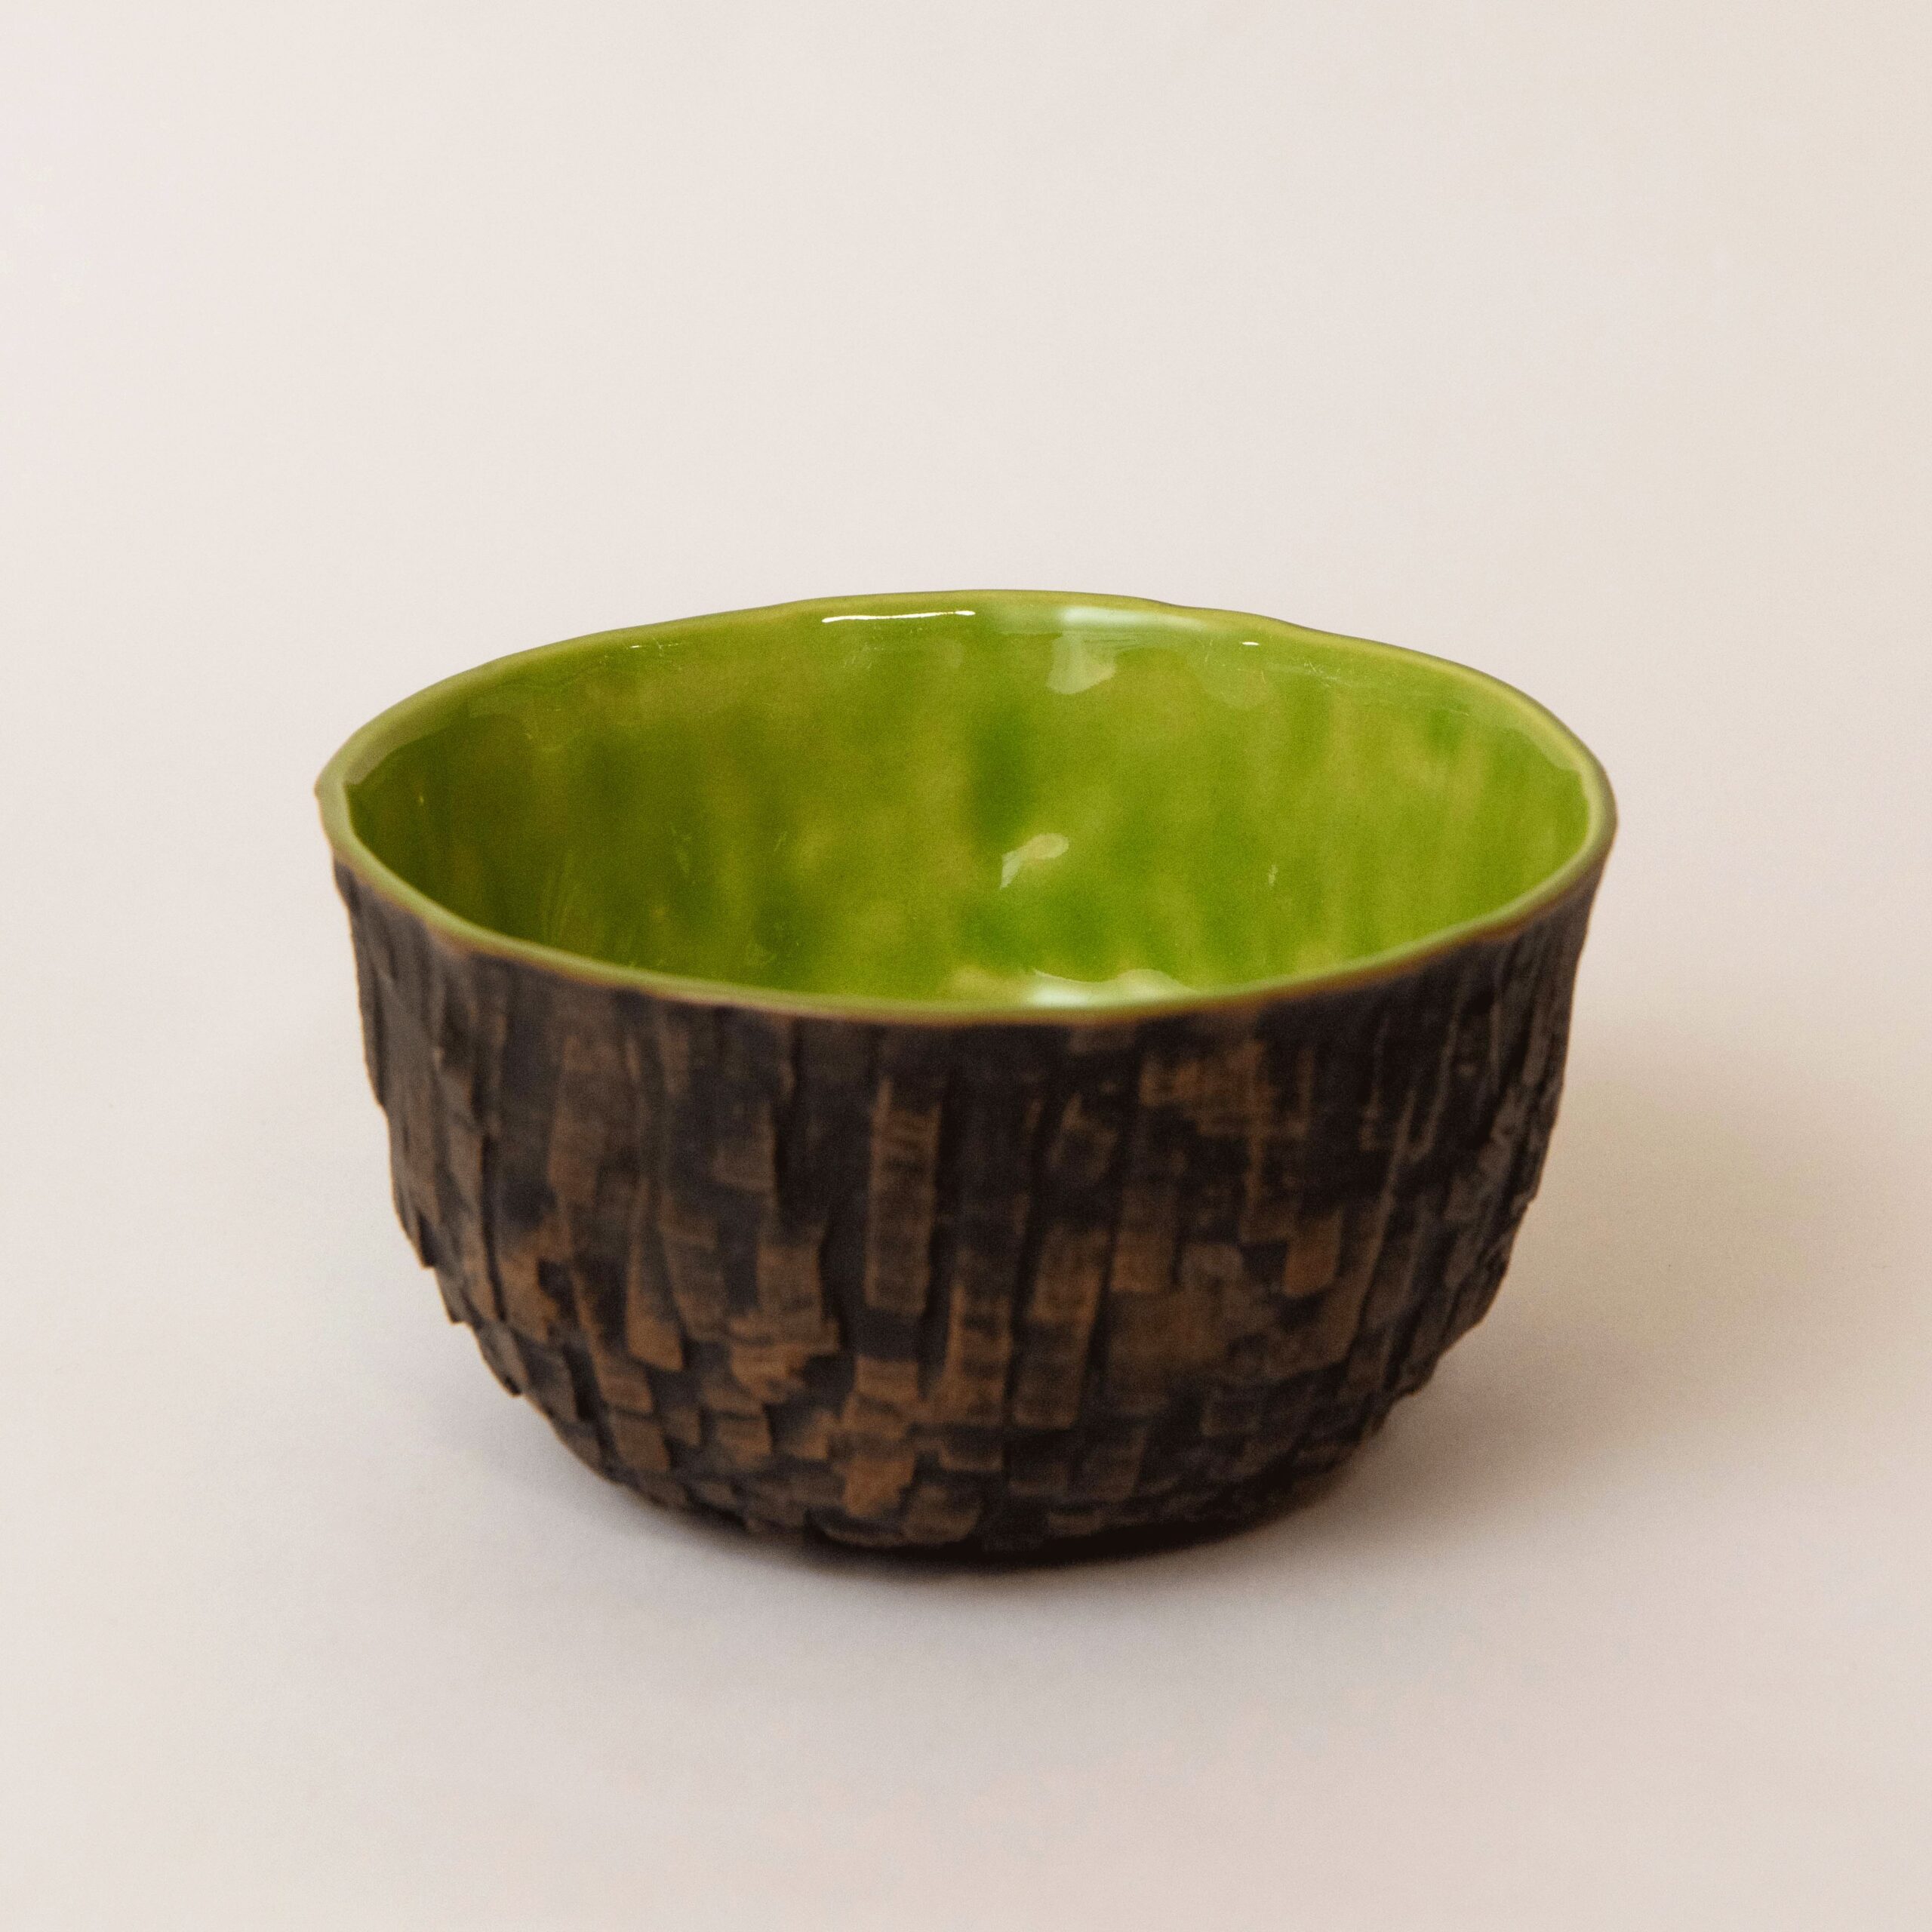 Studio Saboo: Rock Bowl in Green Product Image 1 of 1